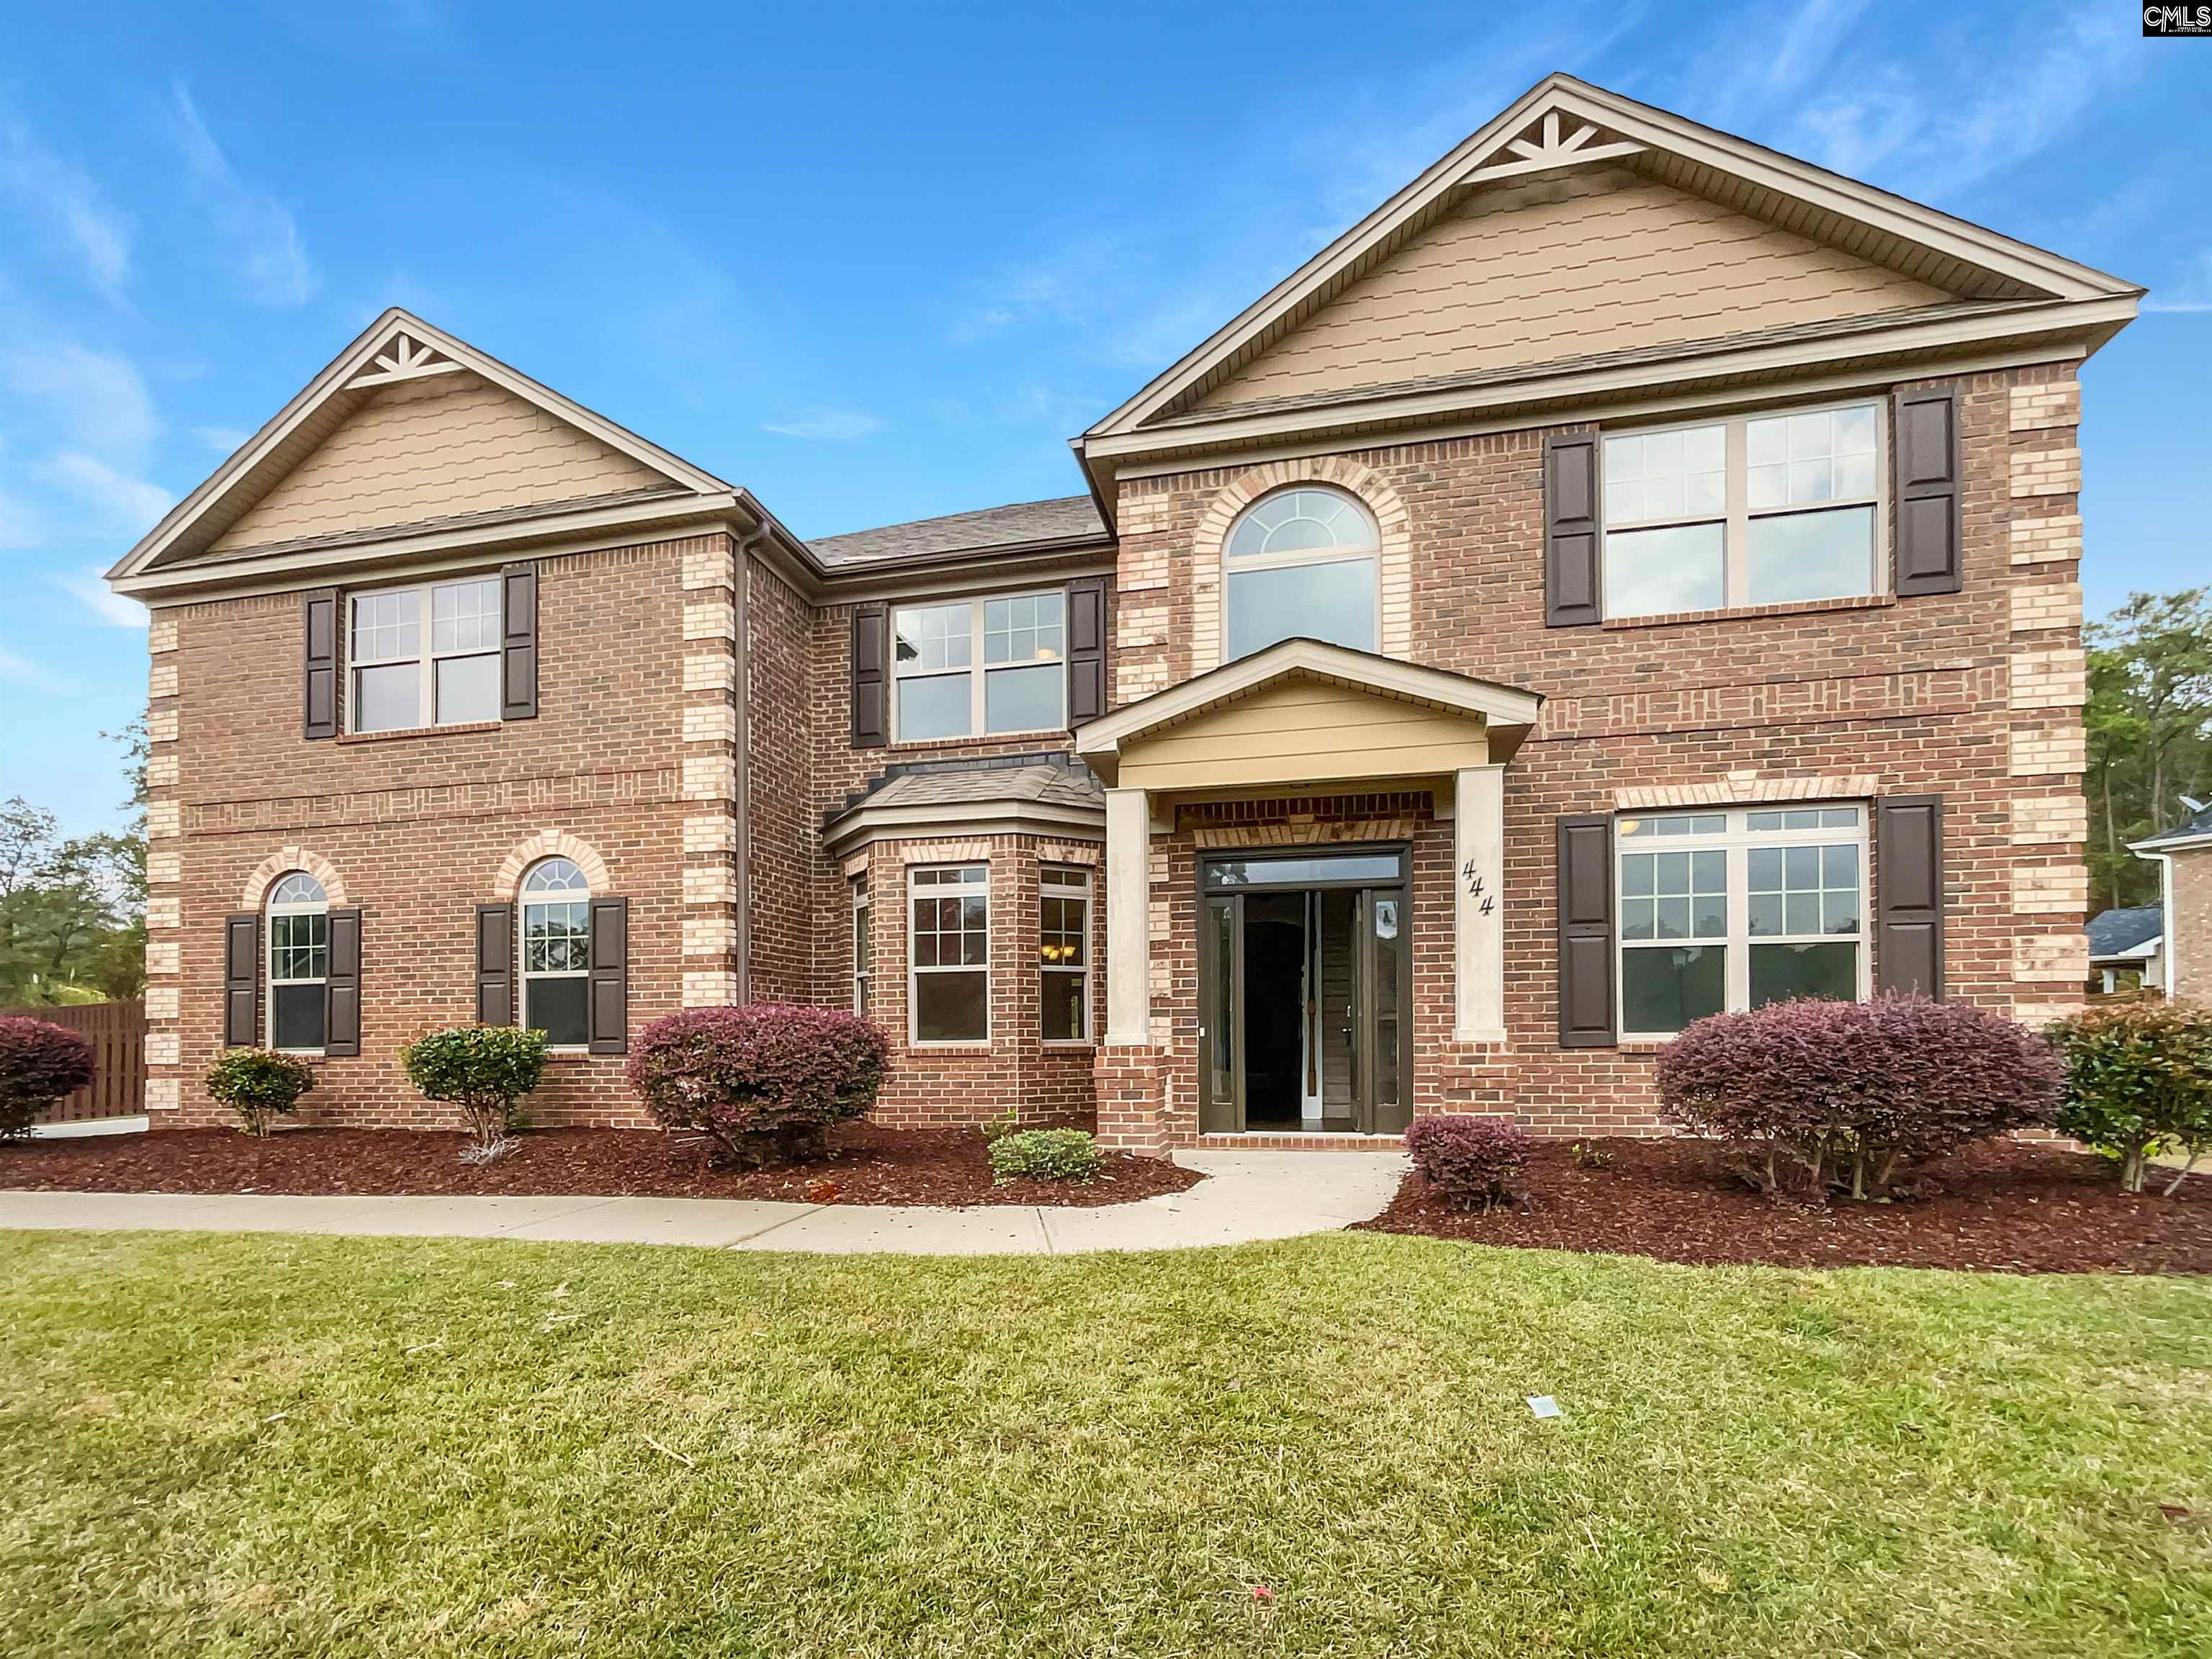 444 Robin Song Court Blythewood, SC 29016